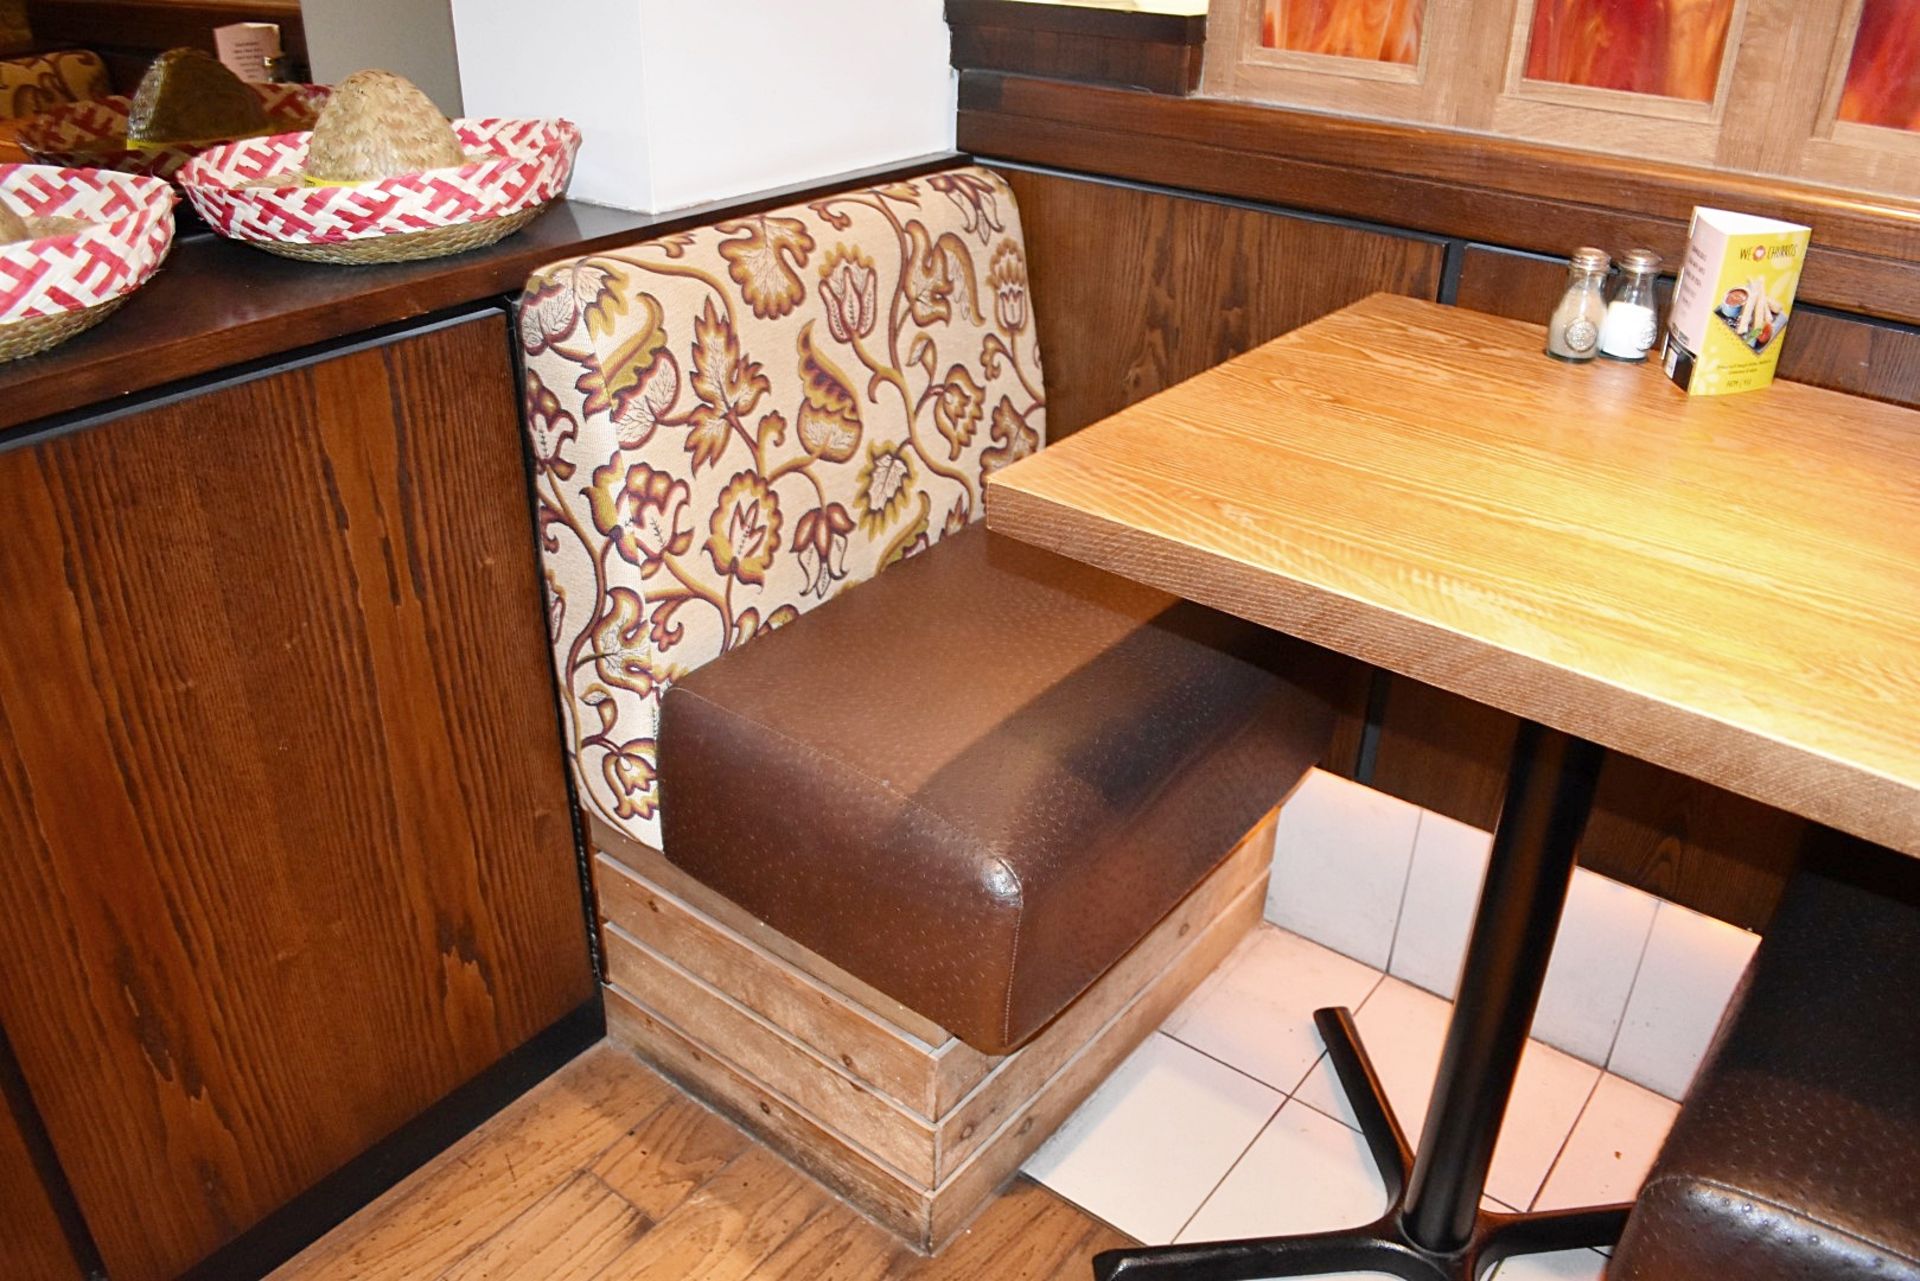 15-Pieces Of Restaurant Booth Seating Of Varying Length - Image 9 of 22